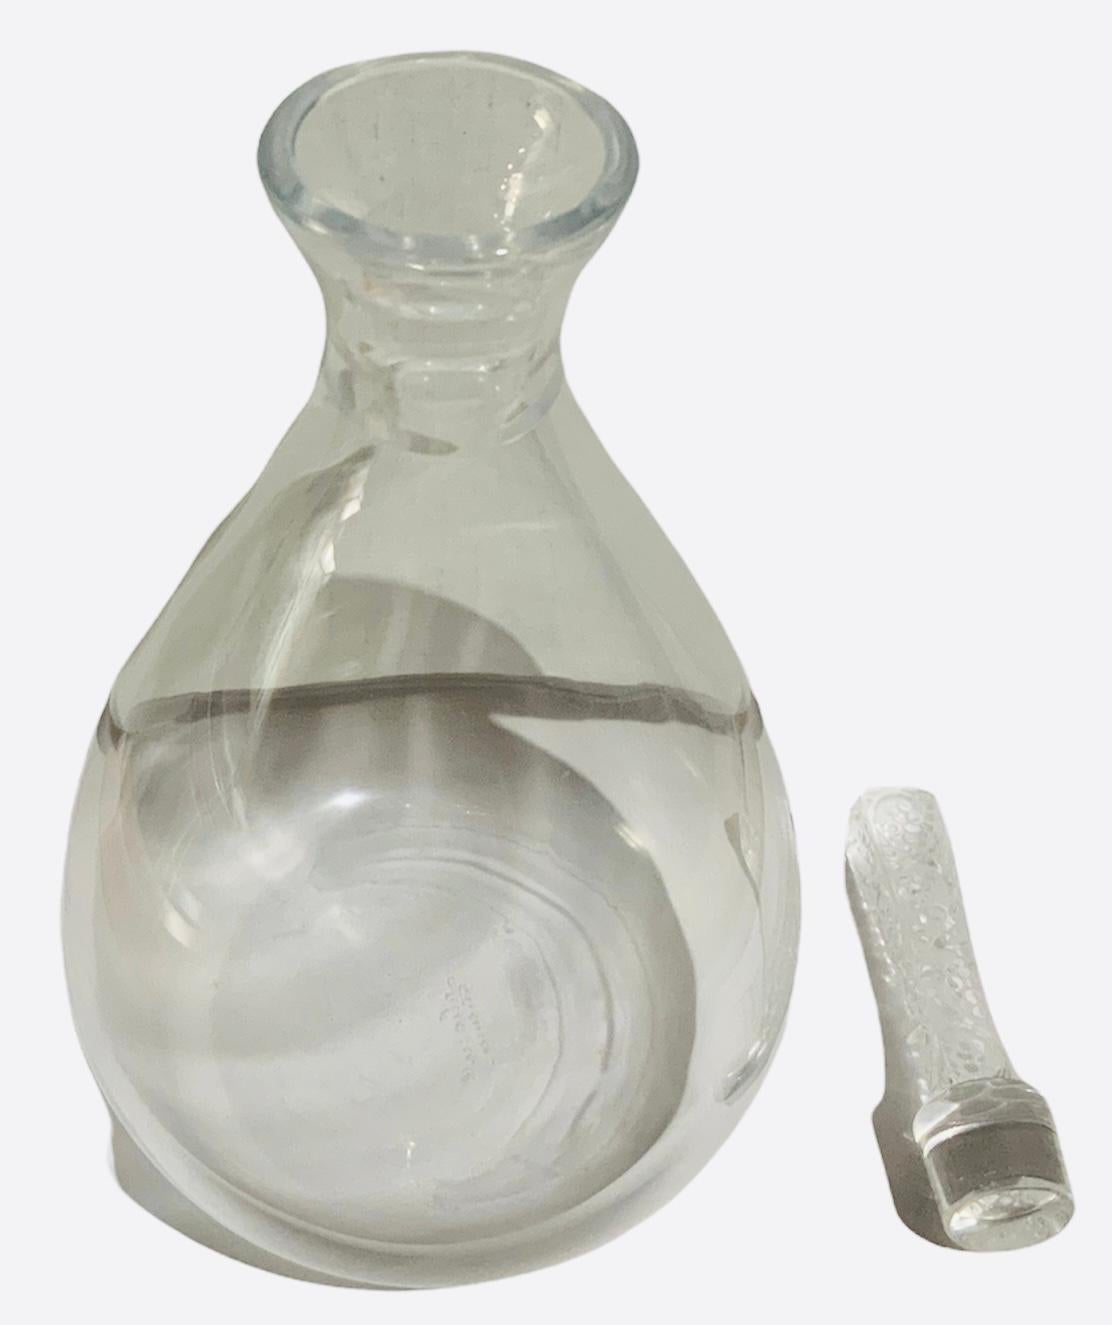 This is a Lalique Crystal Phalsbourg decanter. It depicts an urn shaped clear crystal bottle with a long tapered-rectangular stopper. The stopper is adorned with an etched pattern of long scrolls with grapes. Below the bottle, it is found the